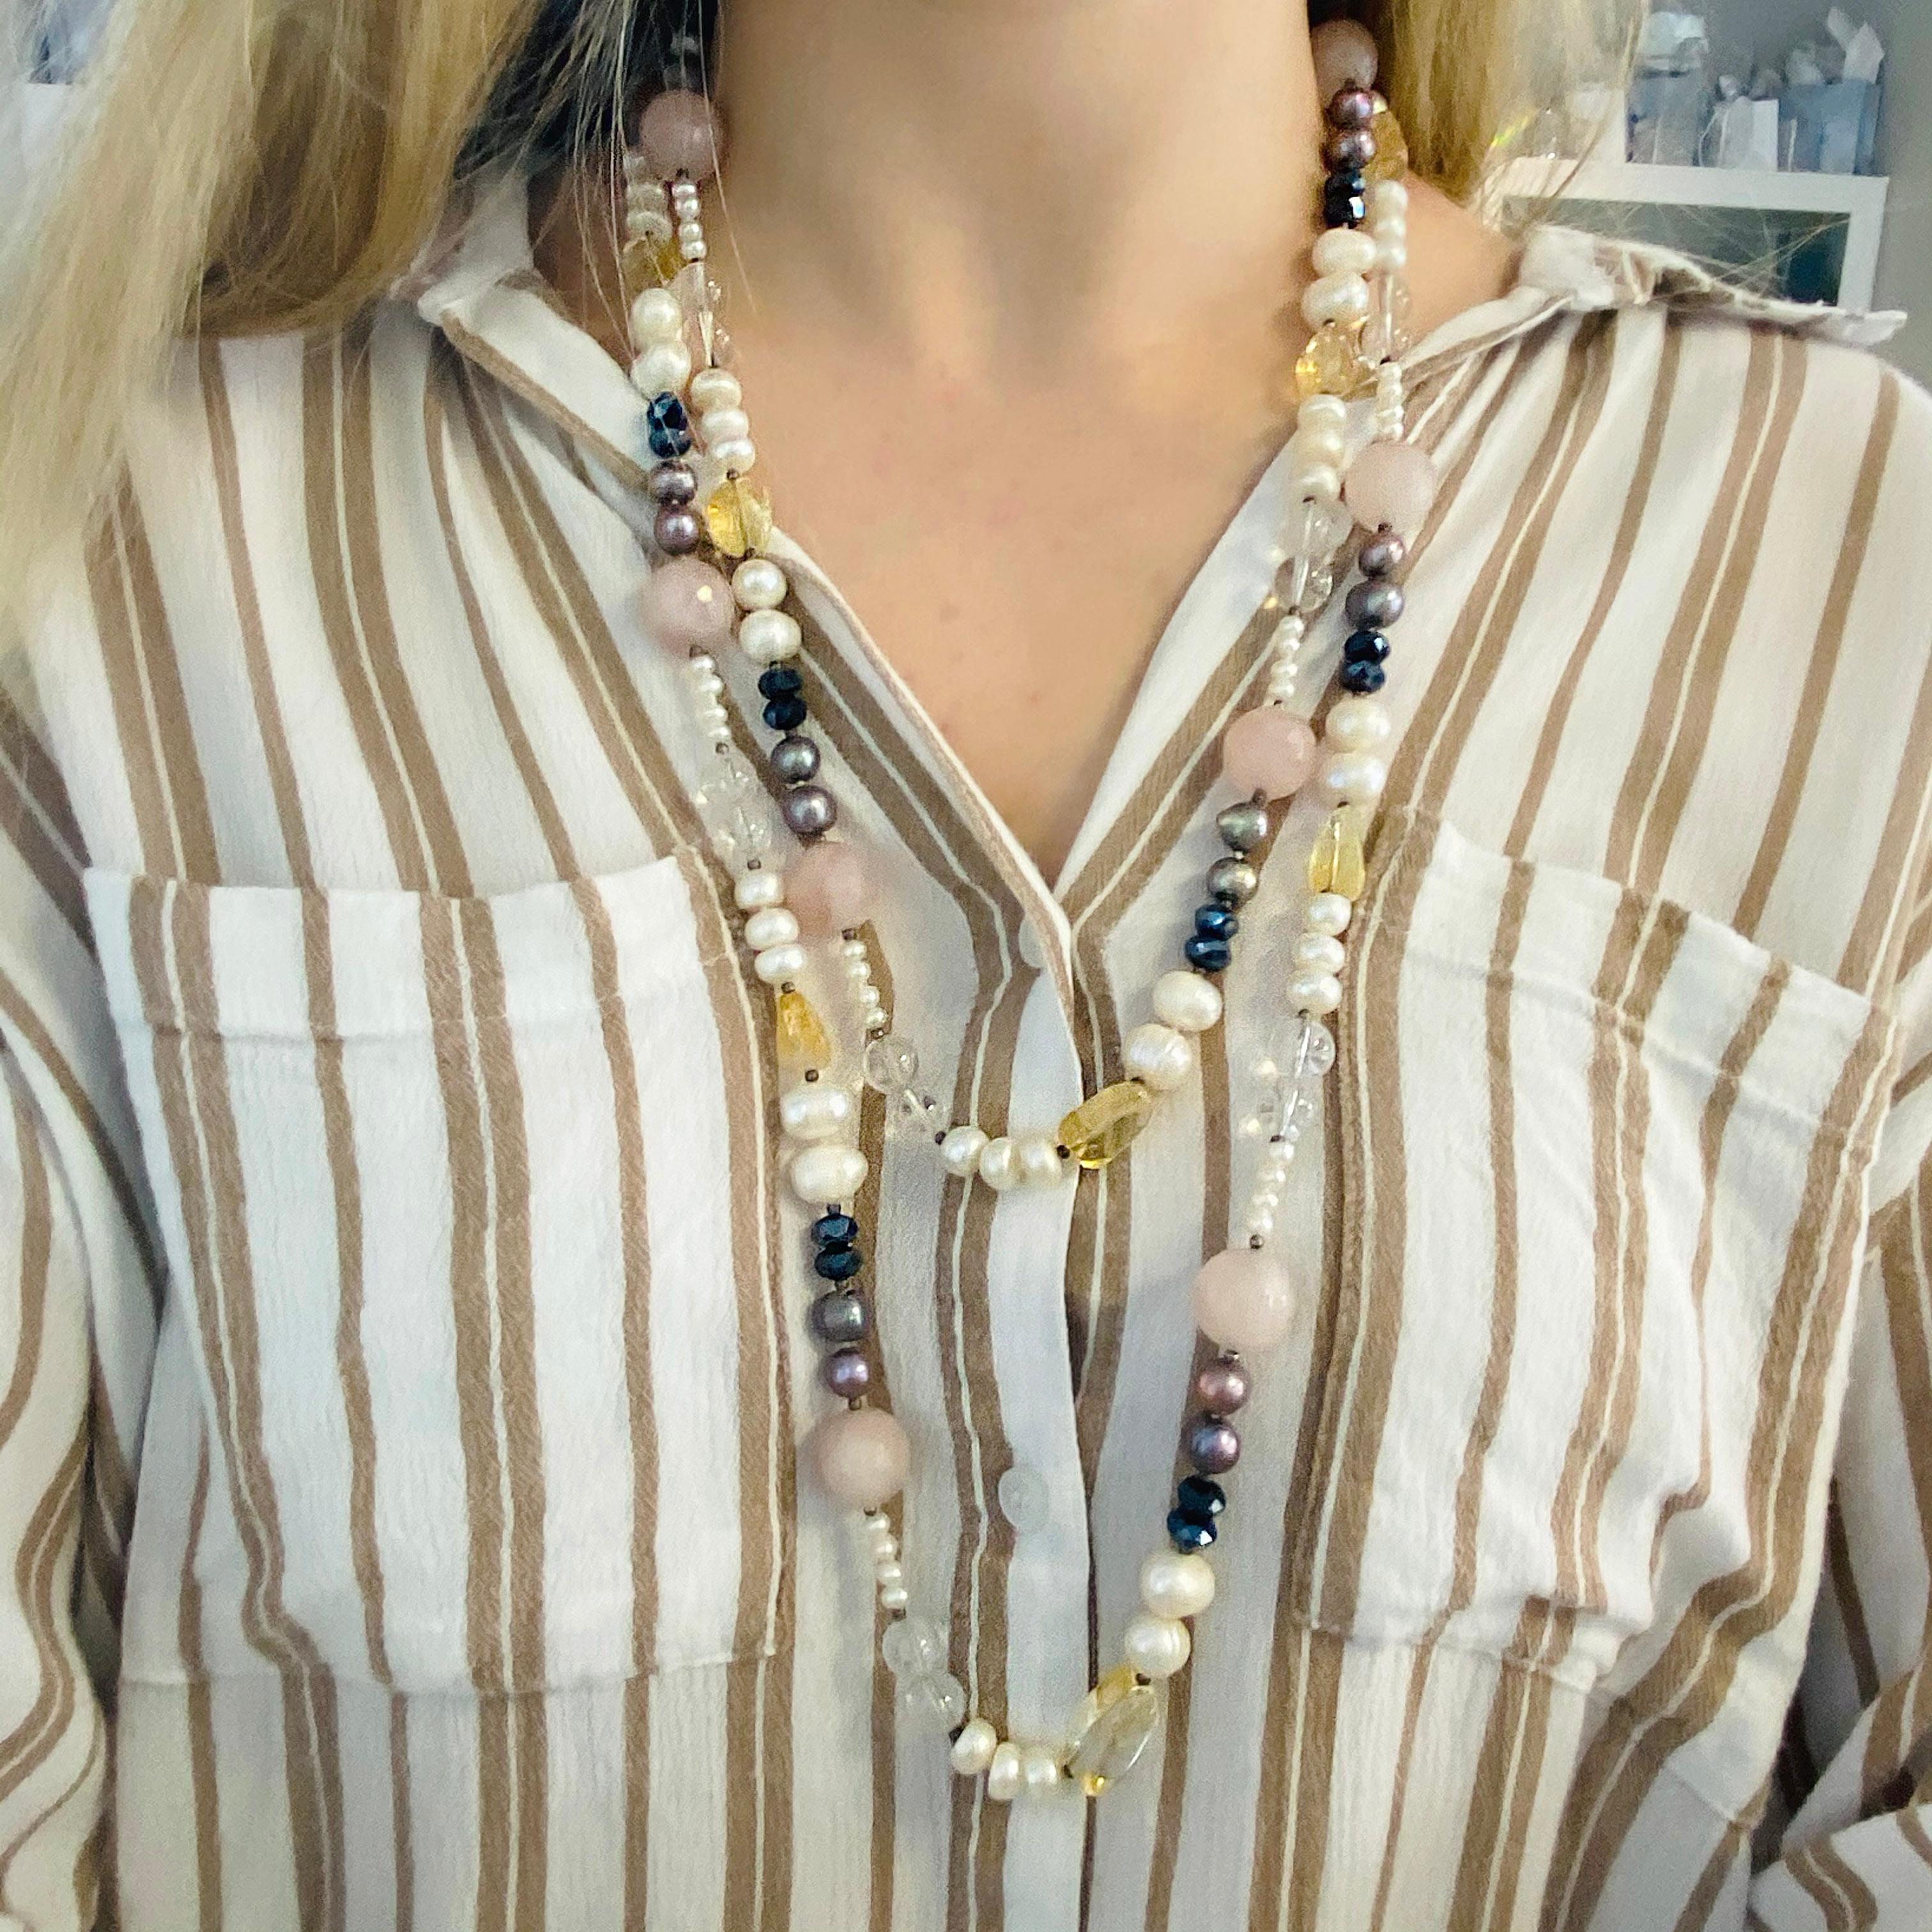 This one-of-a-kind genuine pearl and gemstone necklace is a statement piece! The cultured pearls are white and black and paired with genuine rose quartz, genuine amethyst, genuine citrine. This necklace was hand-made by our jewelers so it is a